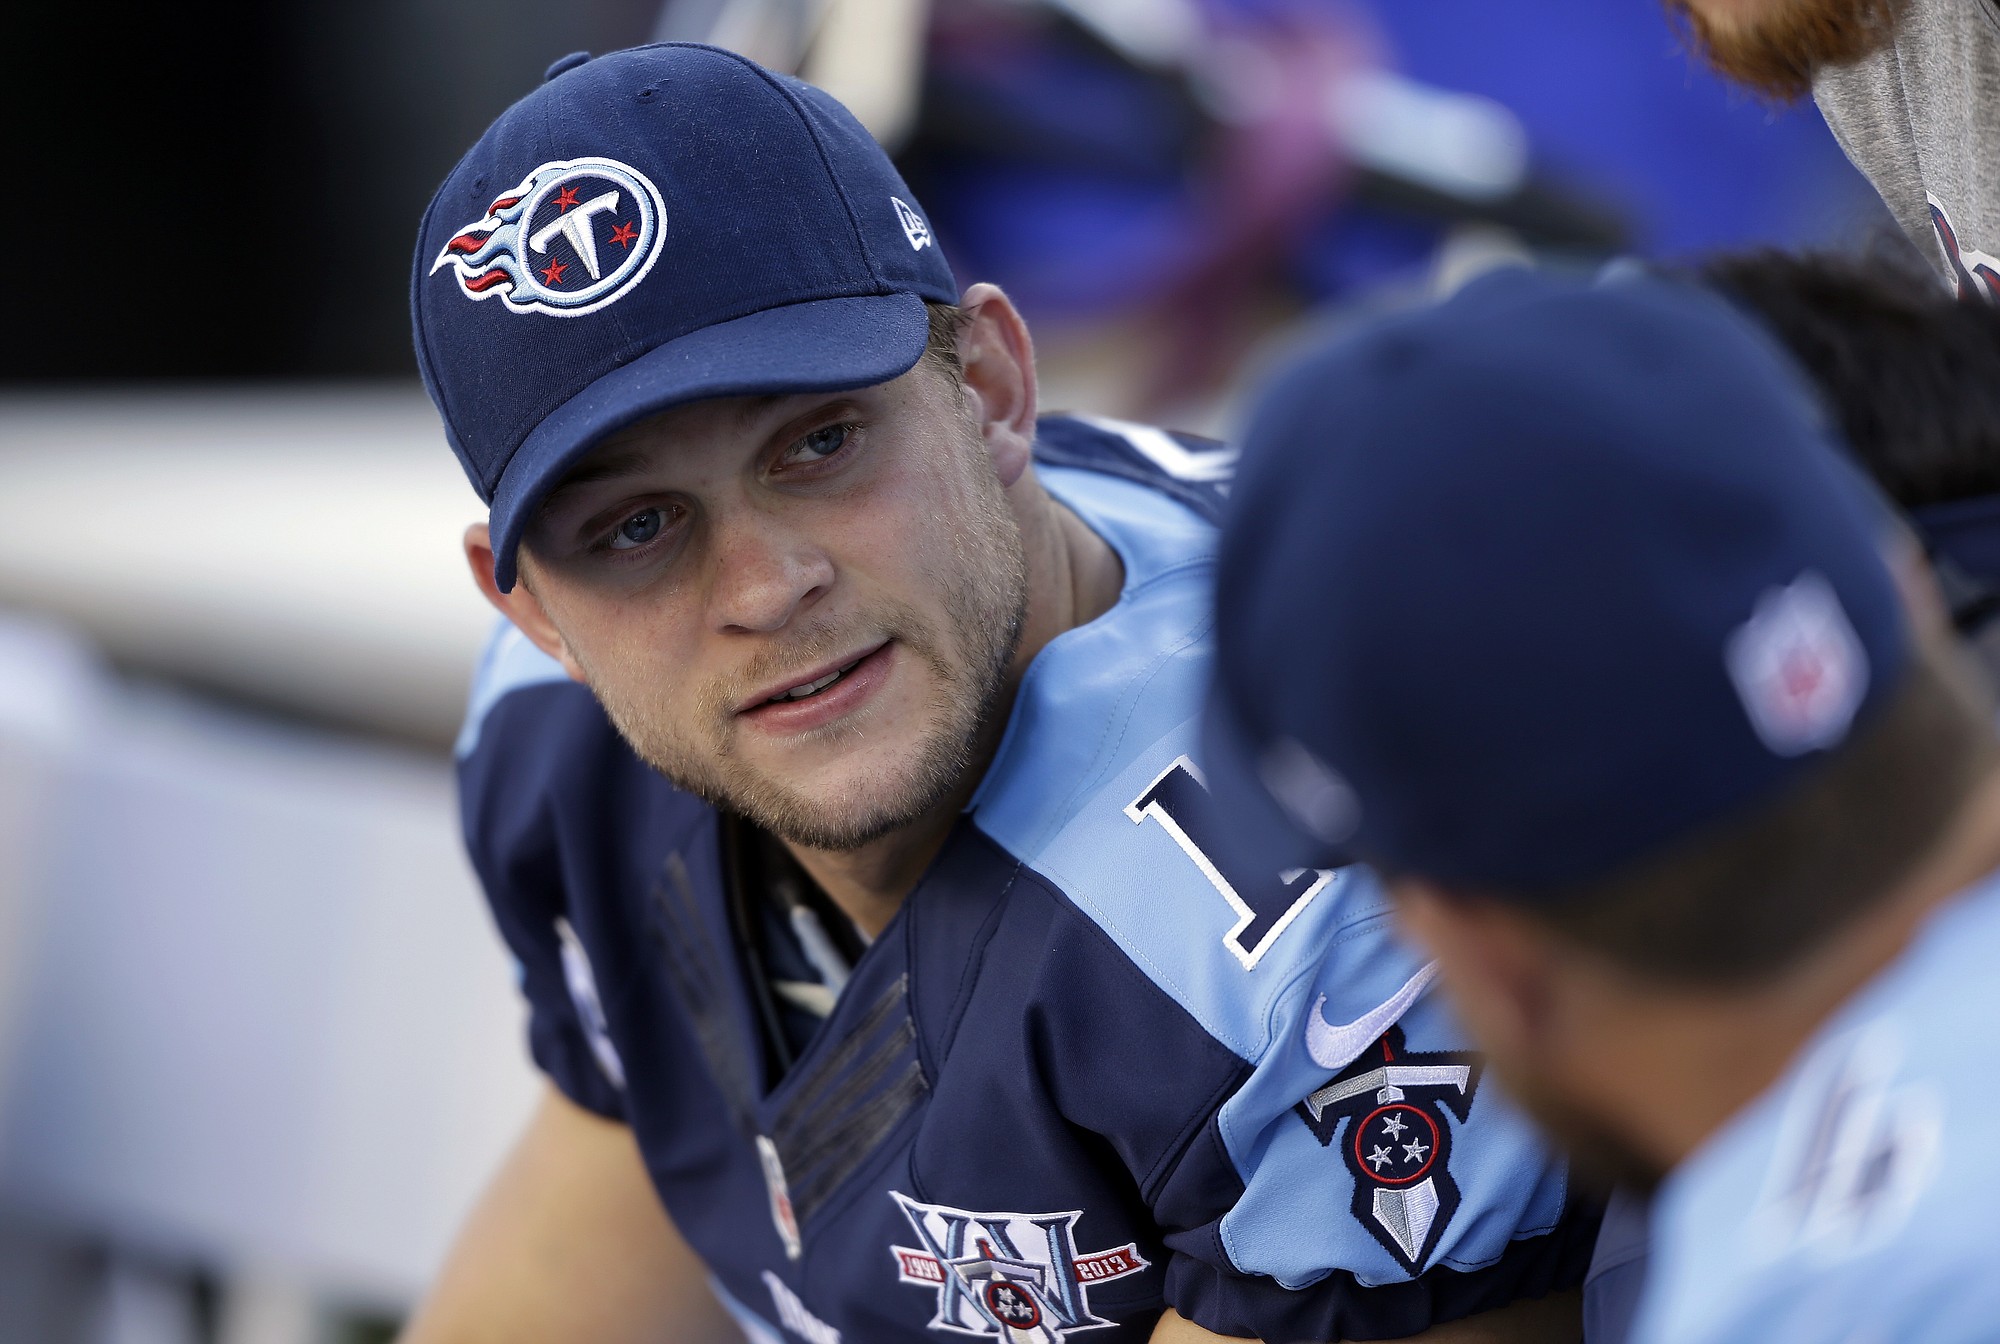 FILE - In this Oct. 20, 2013, file photo, Tennessee Titans quarterback Jake Locker talks on the sideline during the first quarter of an NFL football game against the San Francisco 49ers in Nashville, Tenn. Locker is retiring from football rather than hit free agency after four NFL seasons with the e Titans. He says in a statement Tuesday, March 10, 2015, that he no longer has the &quot;burning desire&quot; needed to keep playing the game for a living.